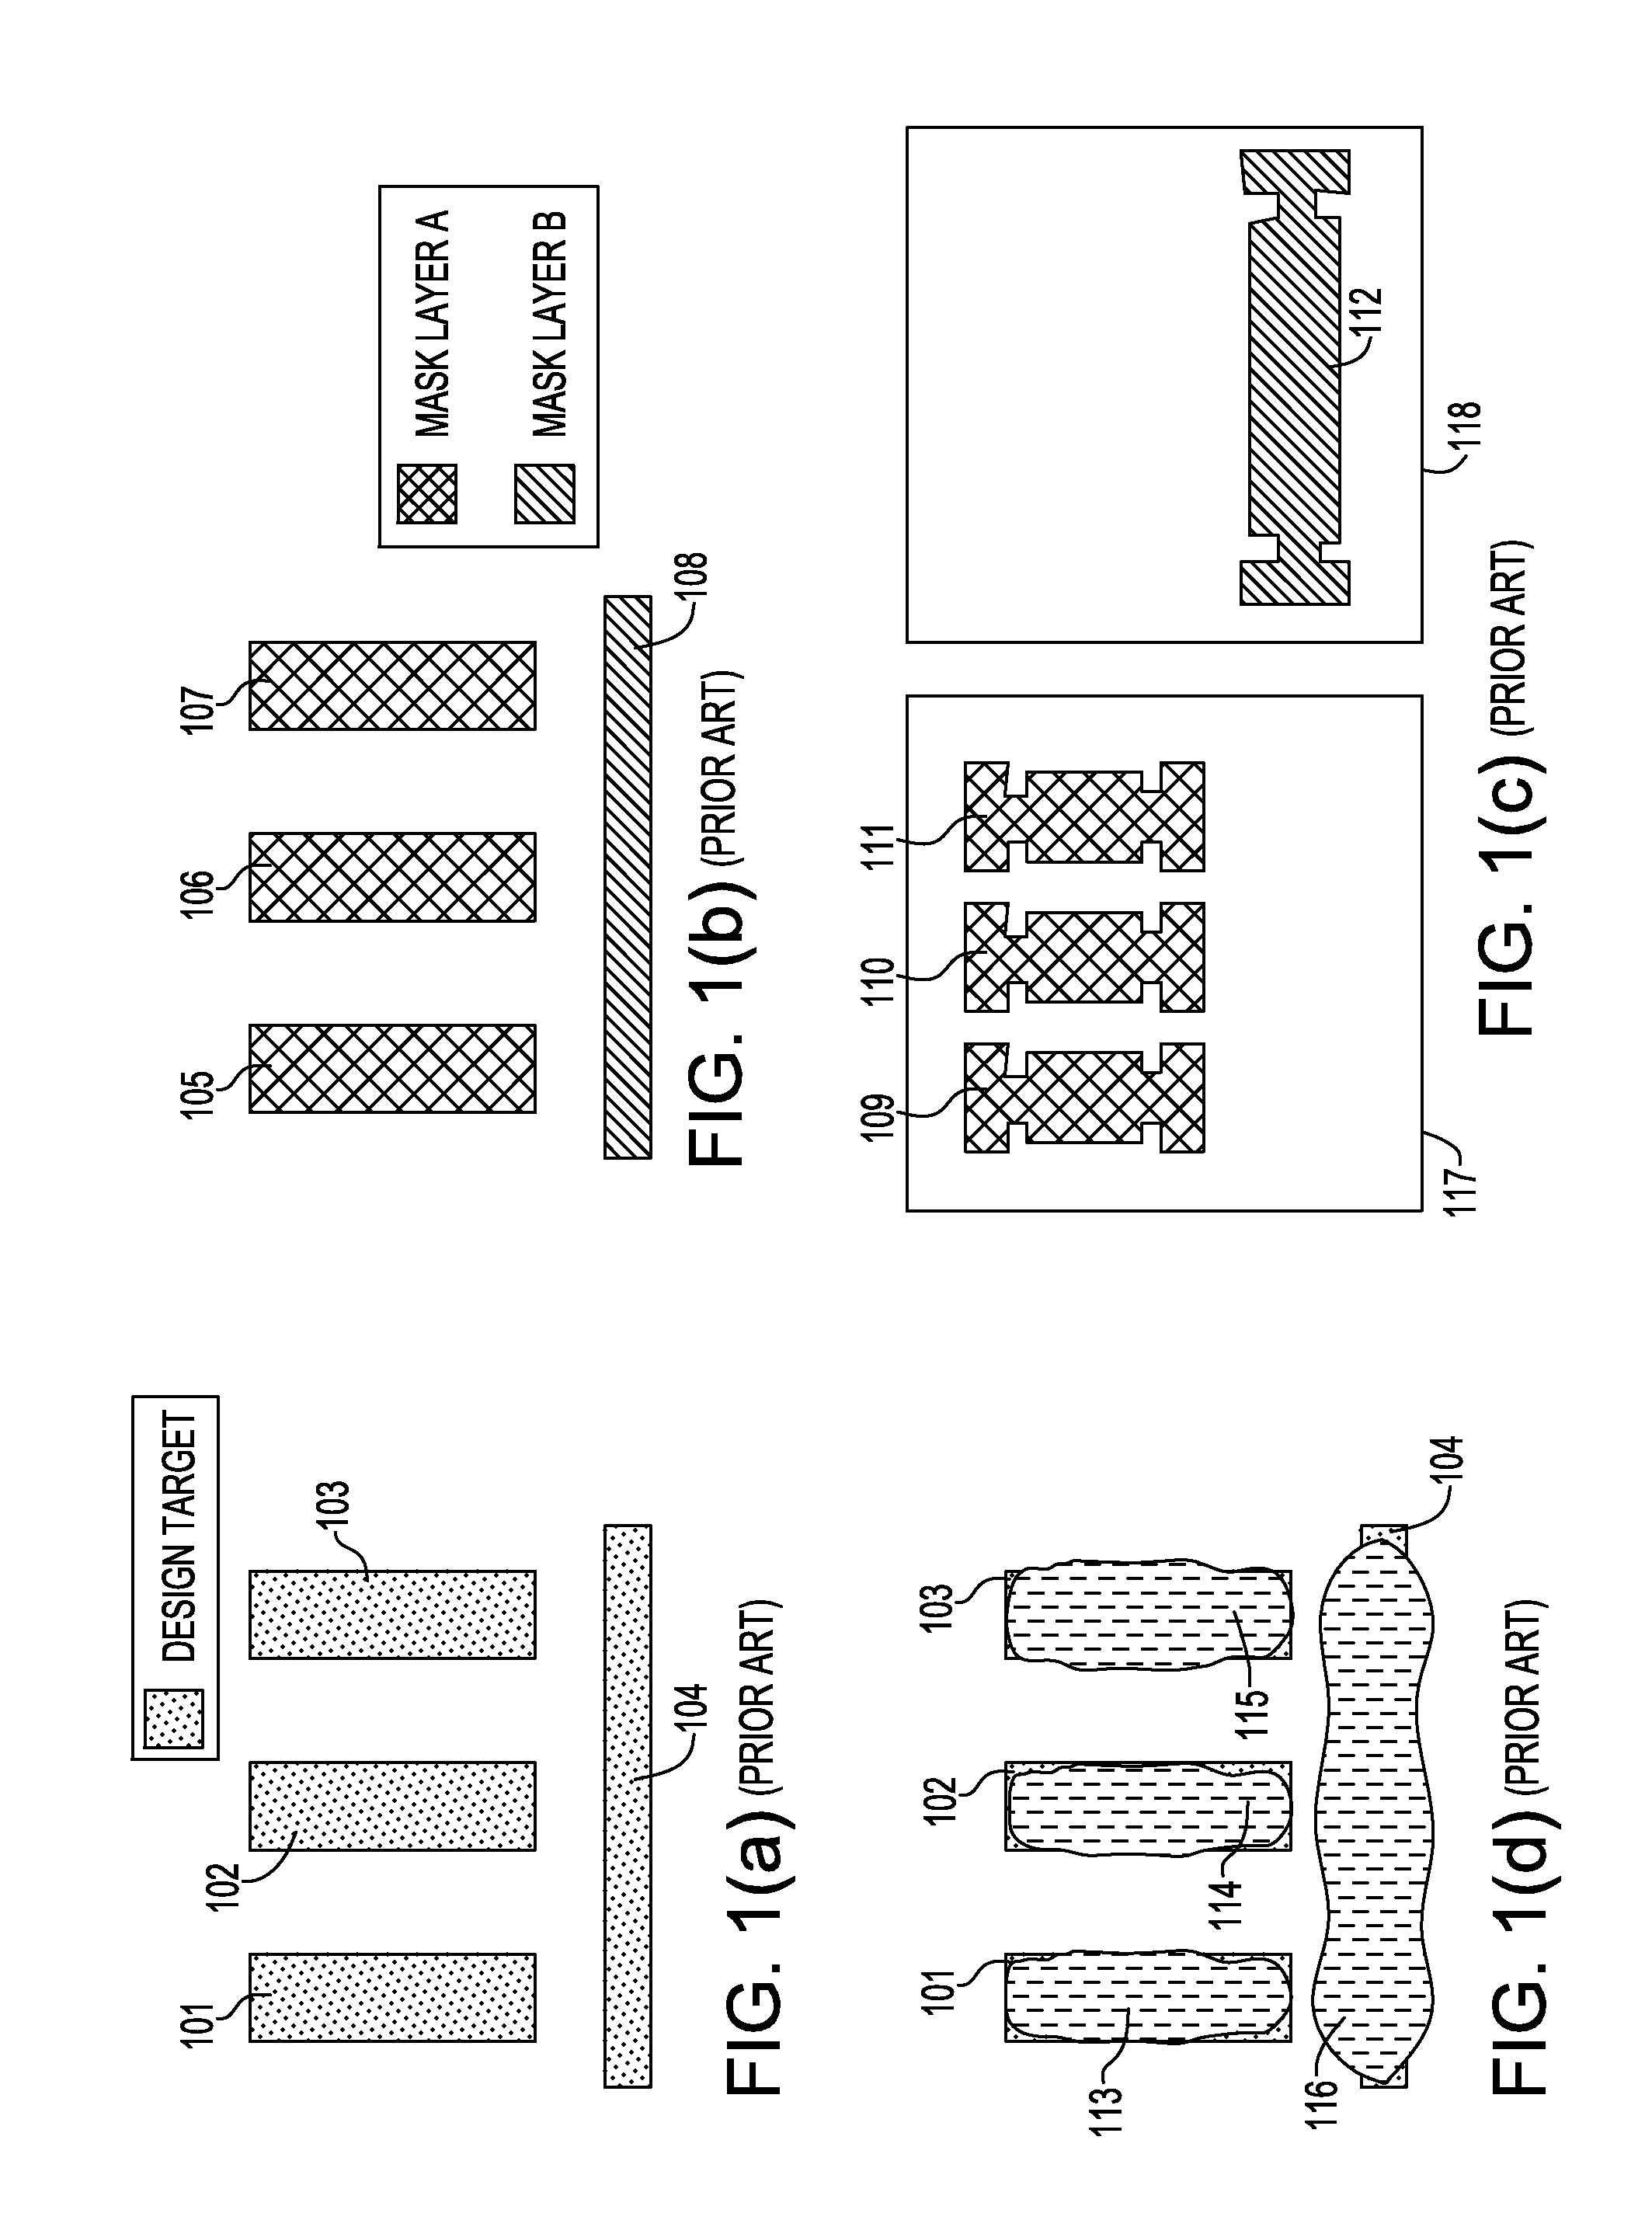 Decomposition with multiple exposures in a process window based opc flow using tolerance bands